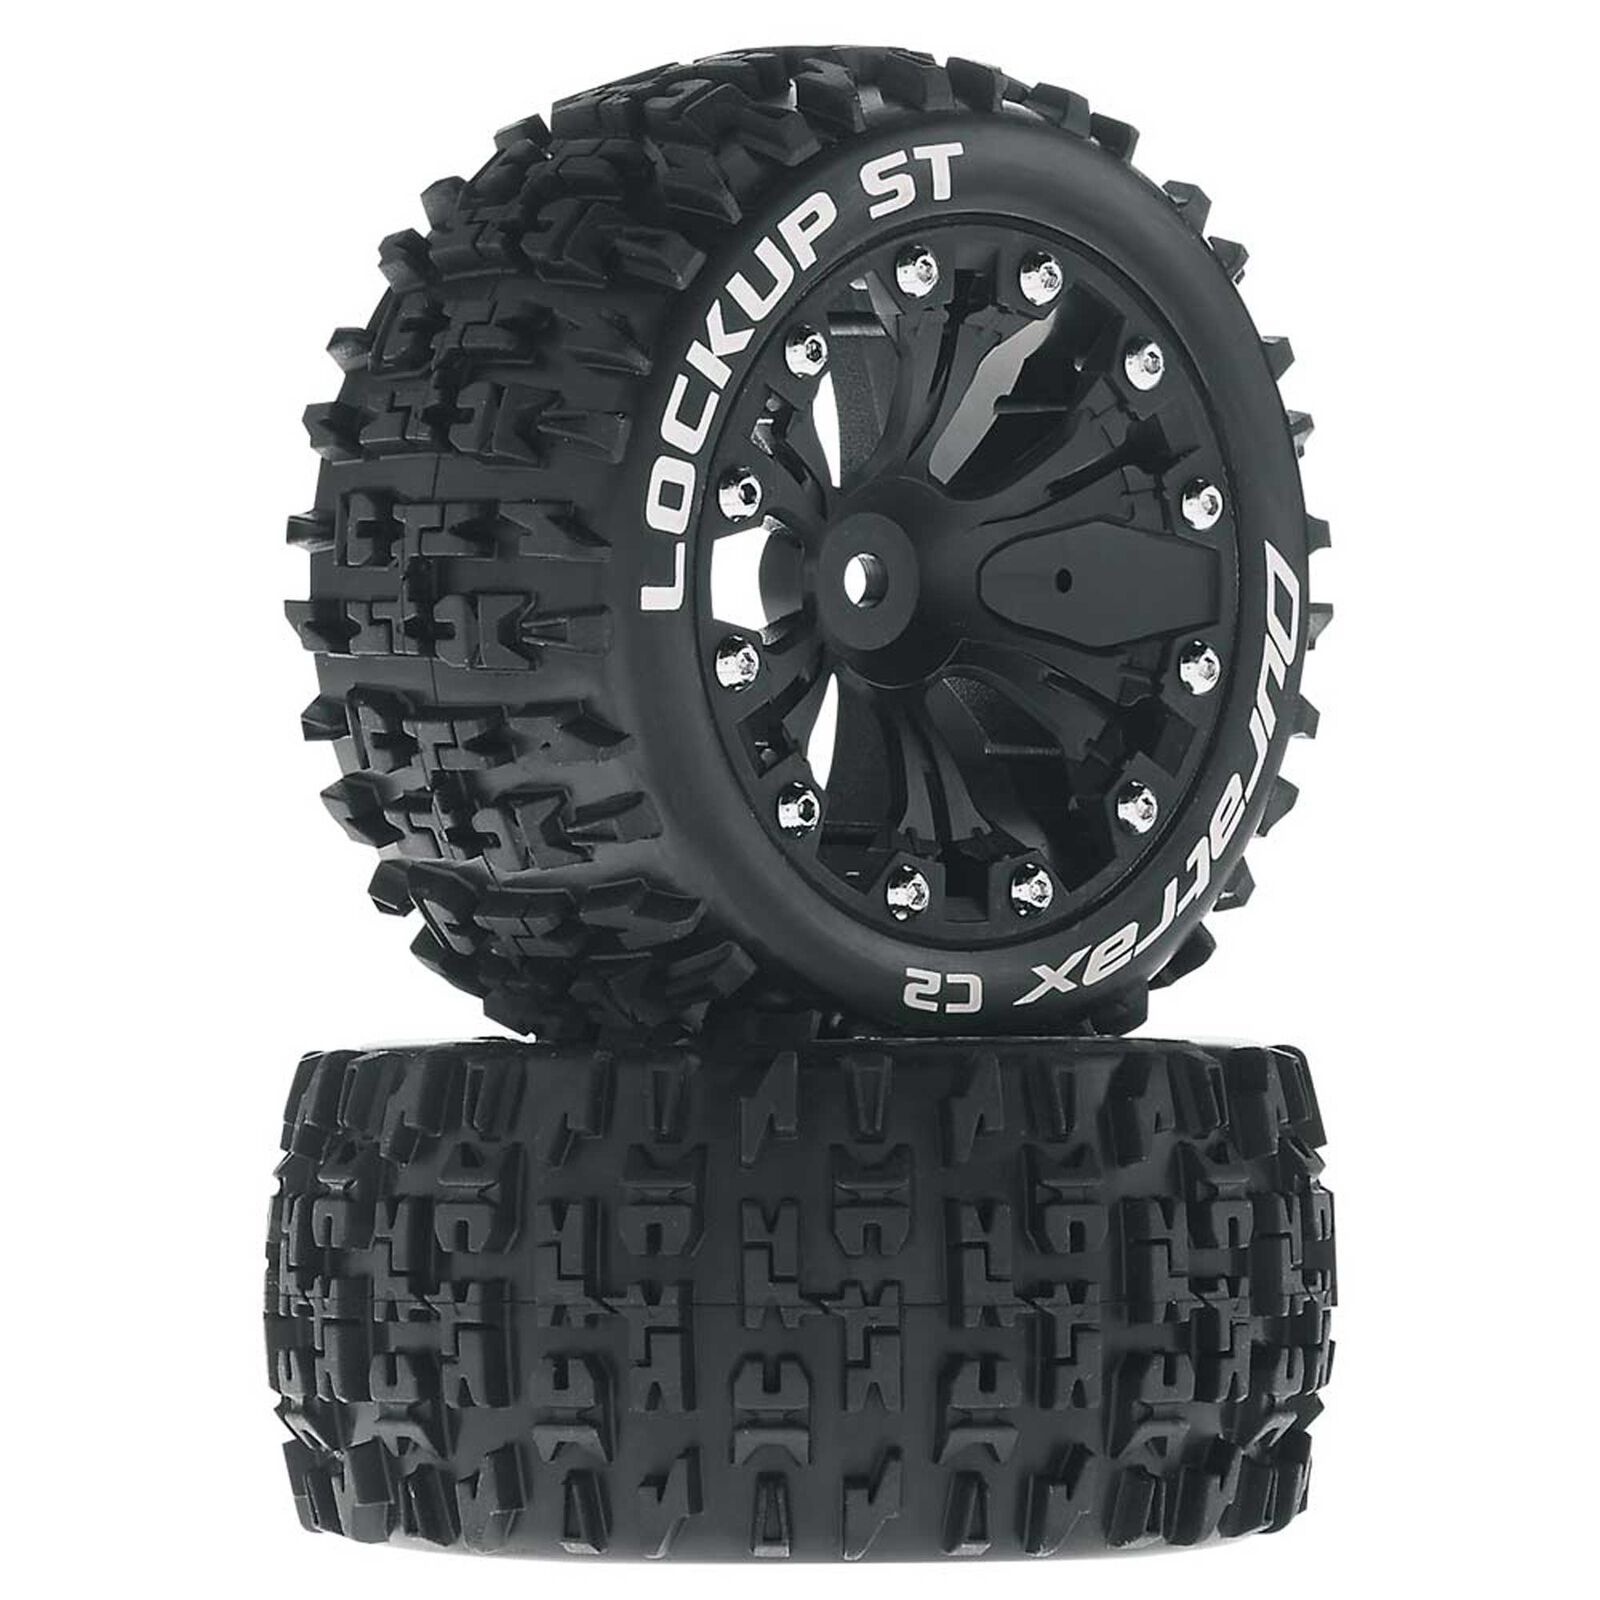 Lockup ST 2.8" 2WD Mounted Rear Tires, Black(2)